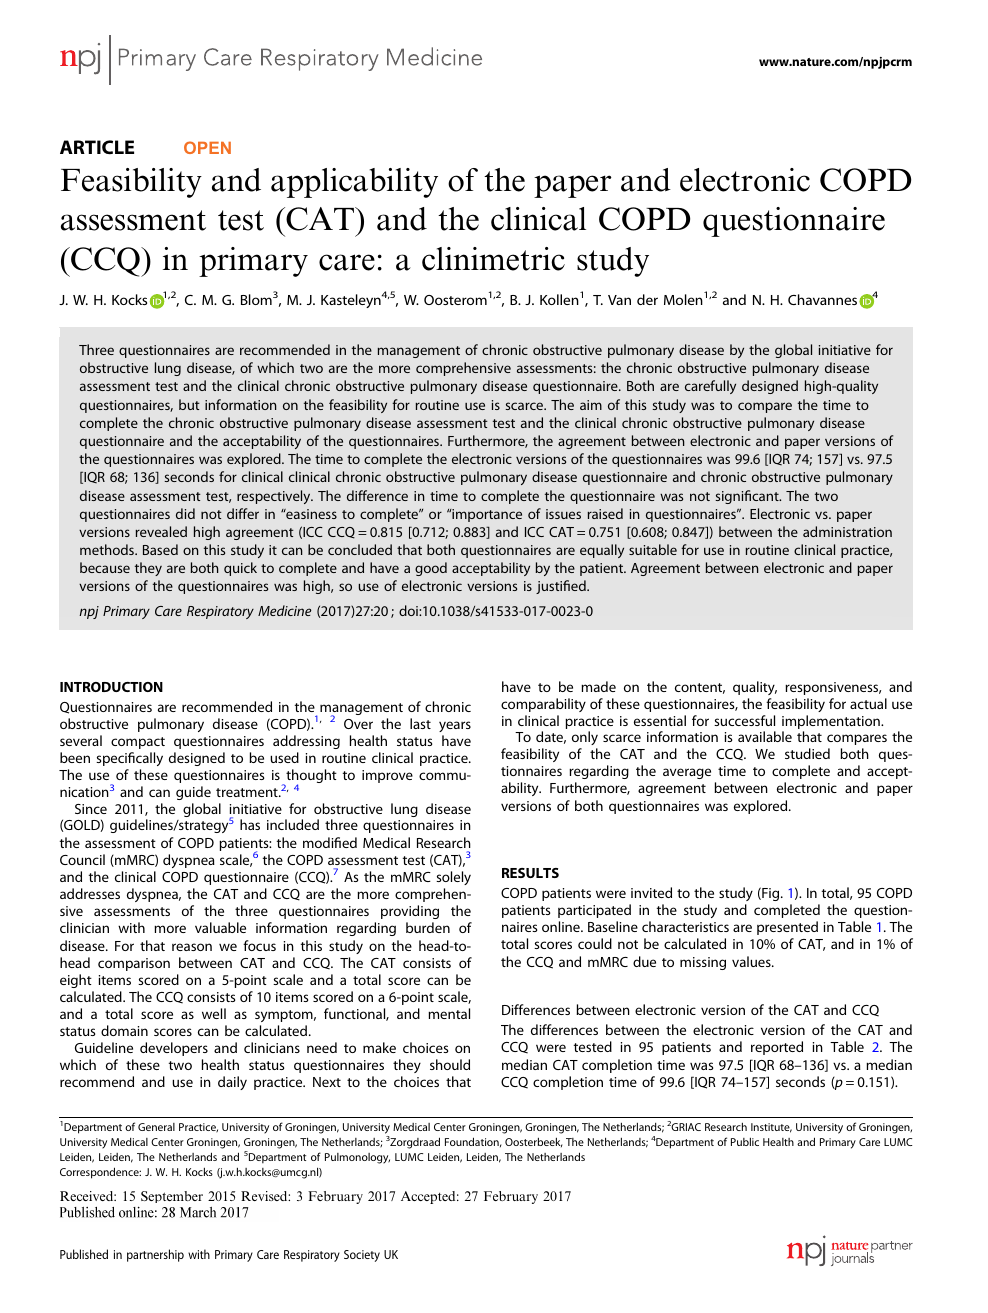 Feasibility And Applicability Of The Paper And Electronic Copd Assessment Test Cat And The Clinical Copd Questionnaire Ccq In Primary Care A Clinimetric Study Topic Of Research Paper In Health Sciences